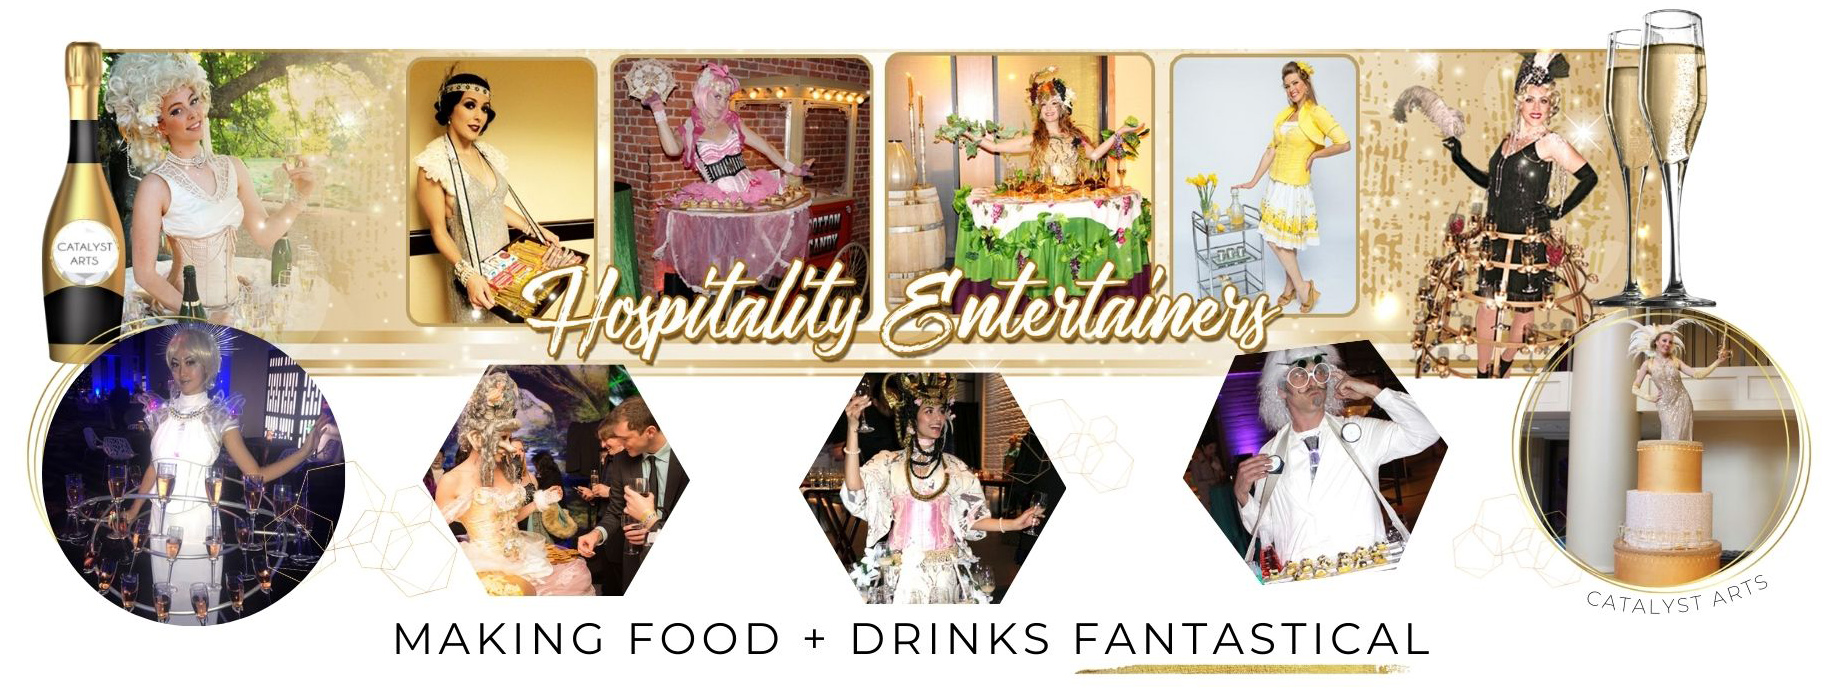 Hospitality Entertainers + Champagne Skirt Hostesses by Catalyst Arts Entertainment